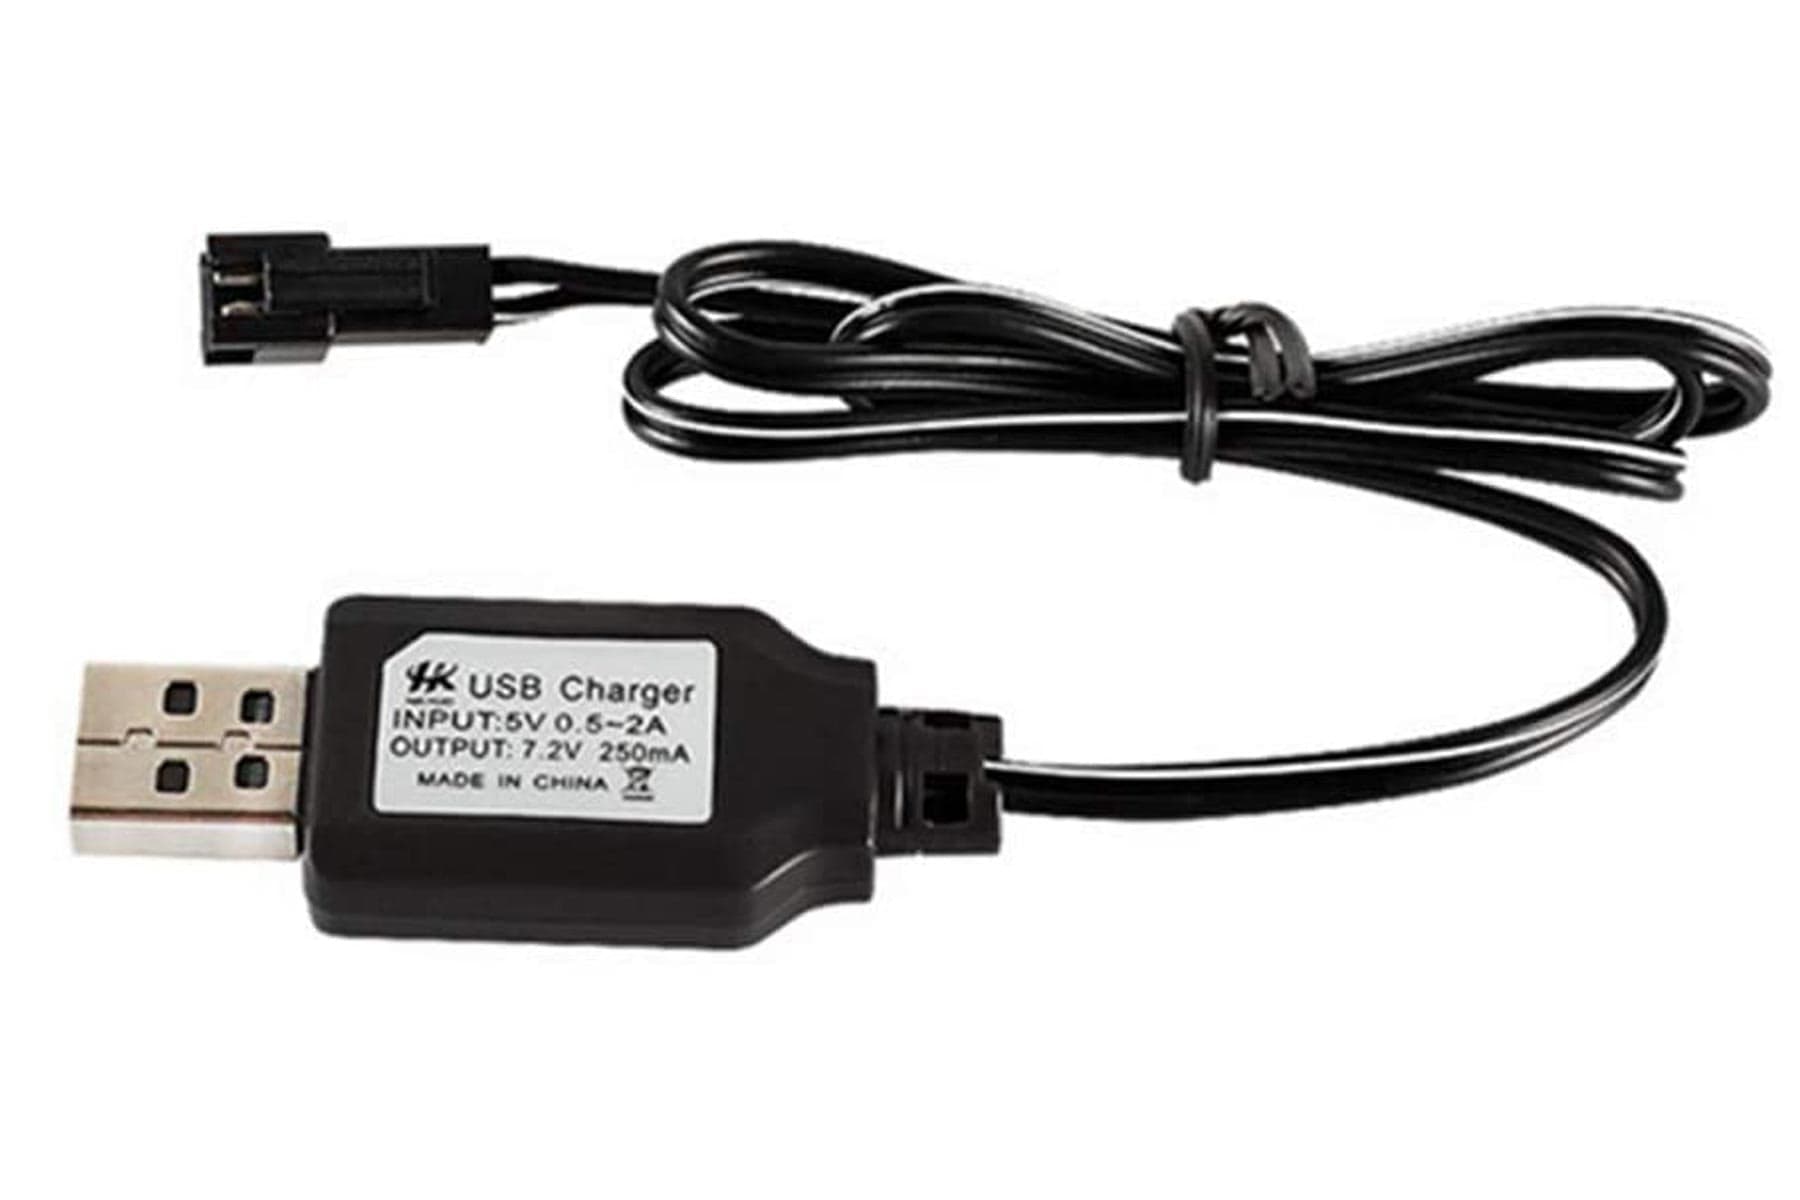 Huina USB NiCd Battery Charger with SM Connector (Forklift, Mobile Crane, T-Crane) HUA6026-002